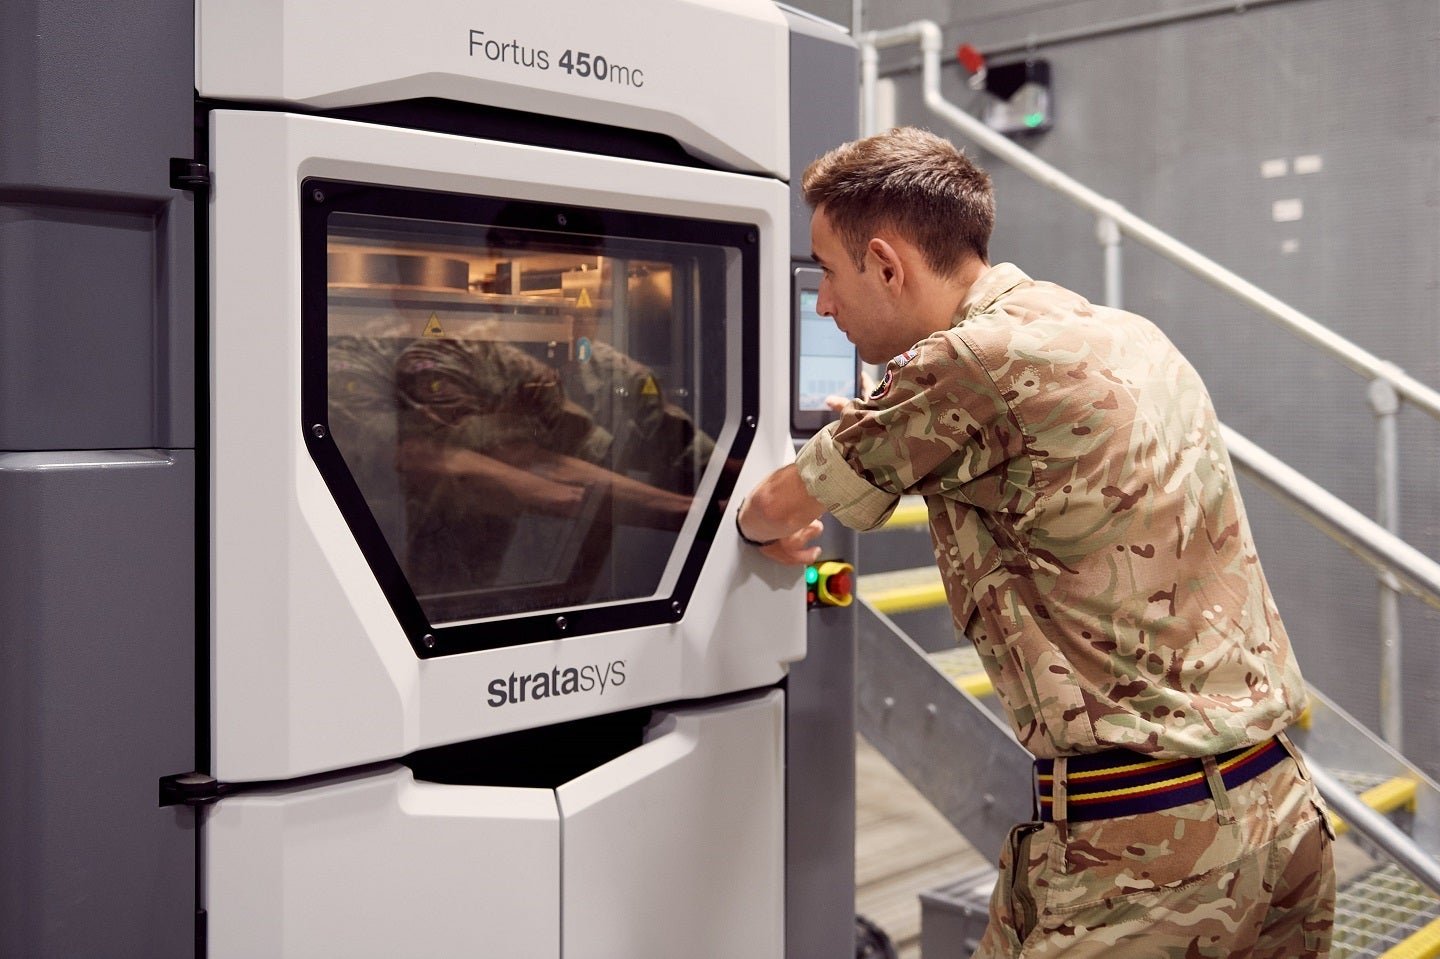 3D printing is set to redefine aerospace and defence logistics says GlobalData